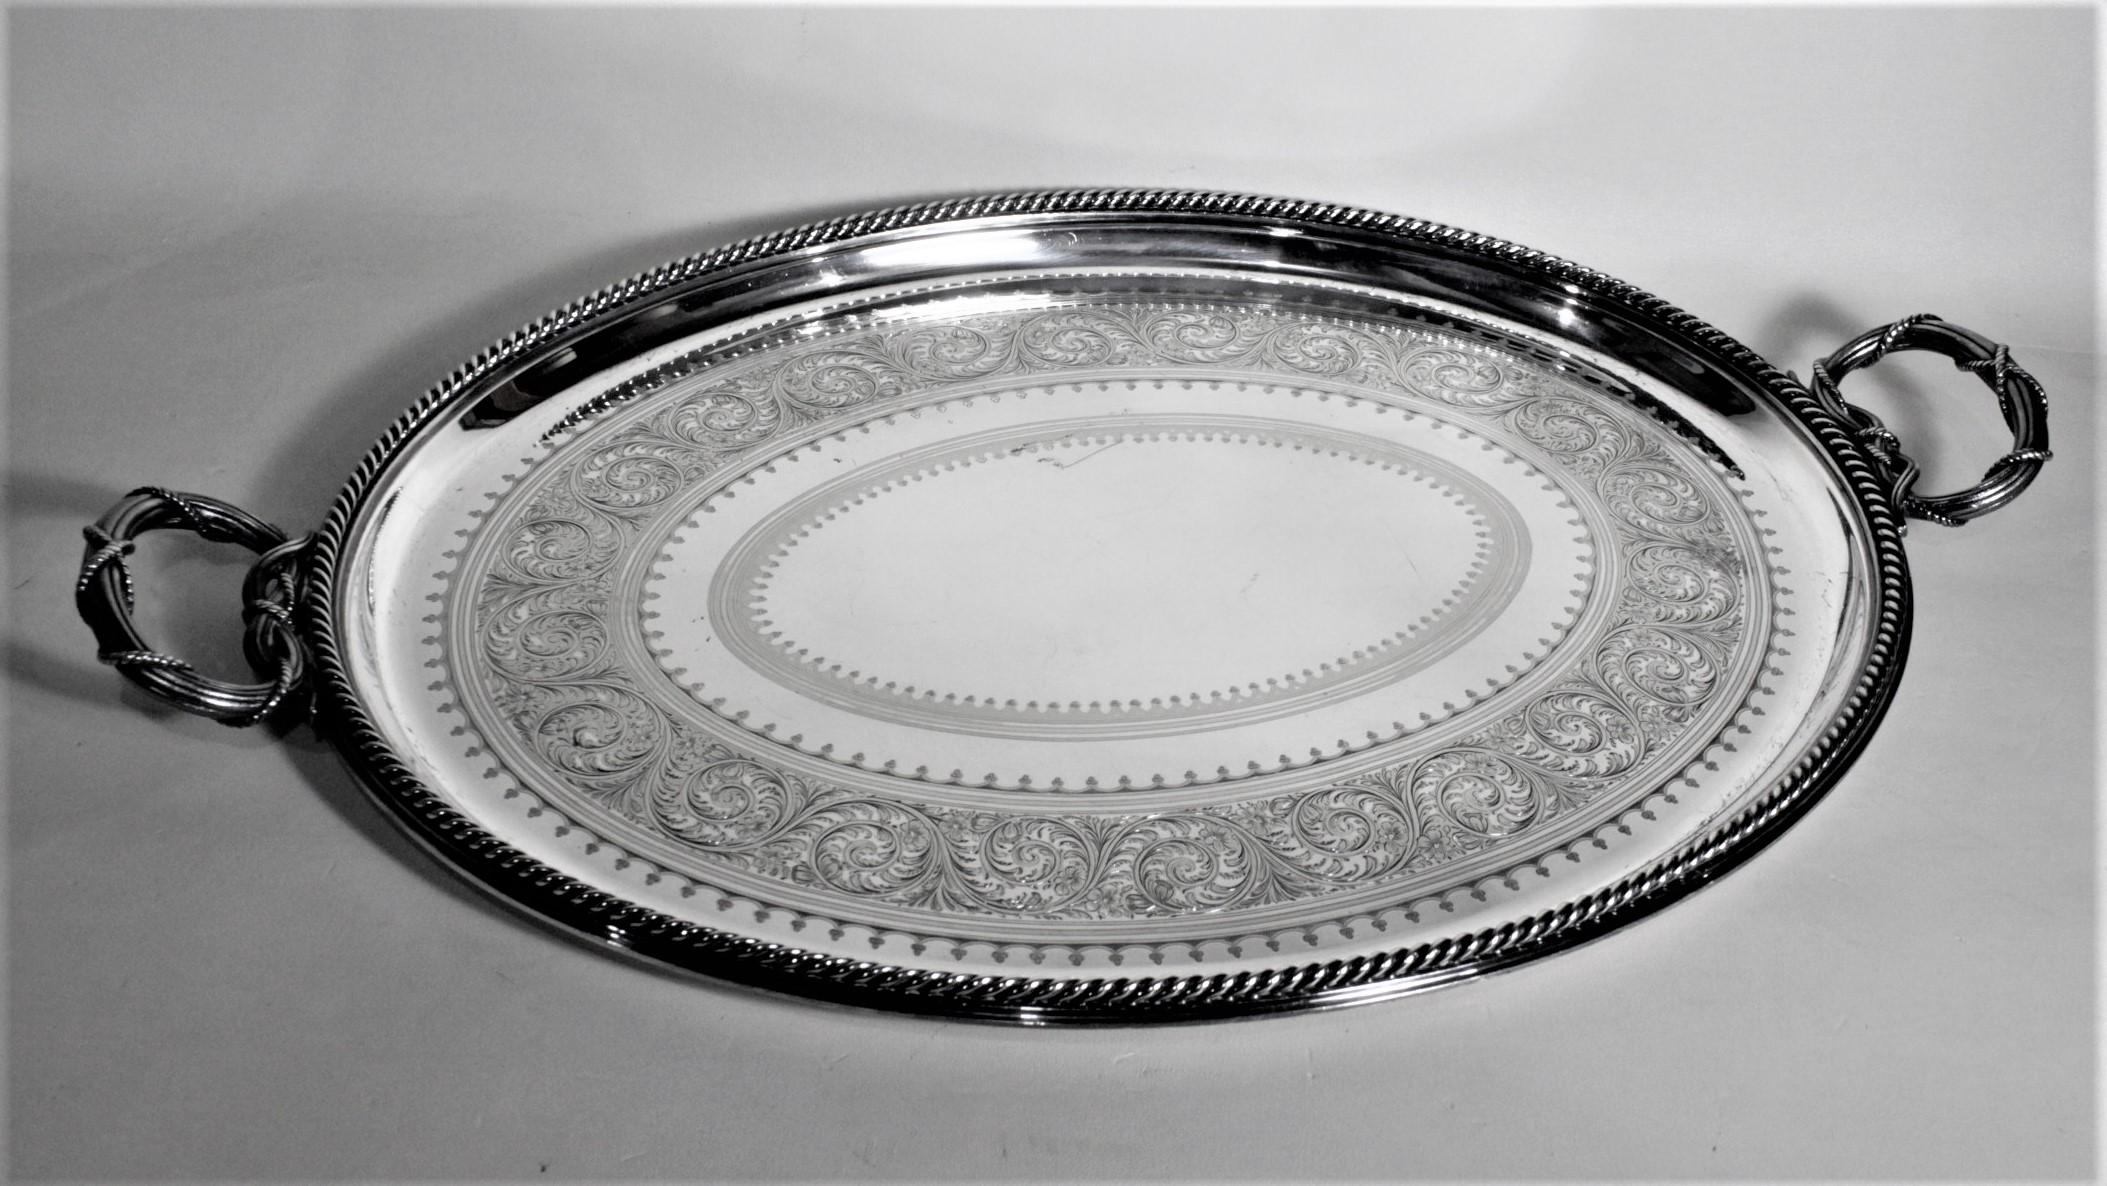 This antique silver plated serving tray was made by the Elkington & Co. of England in circa 1890 in the period Victorian style. The tray has a nicely engraved outer band with a swirled floral motif and two smaller bands of a rope or garland which